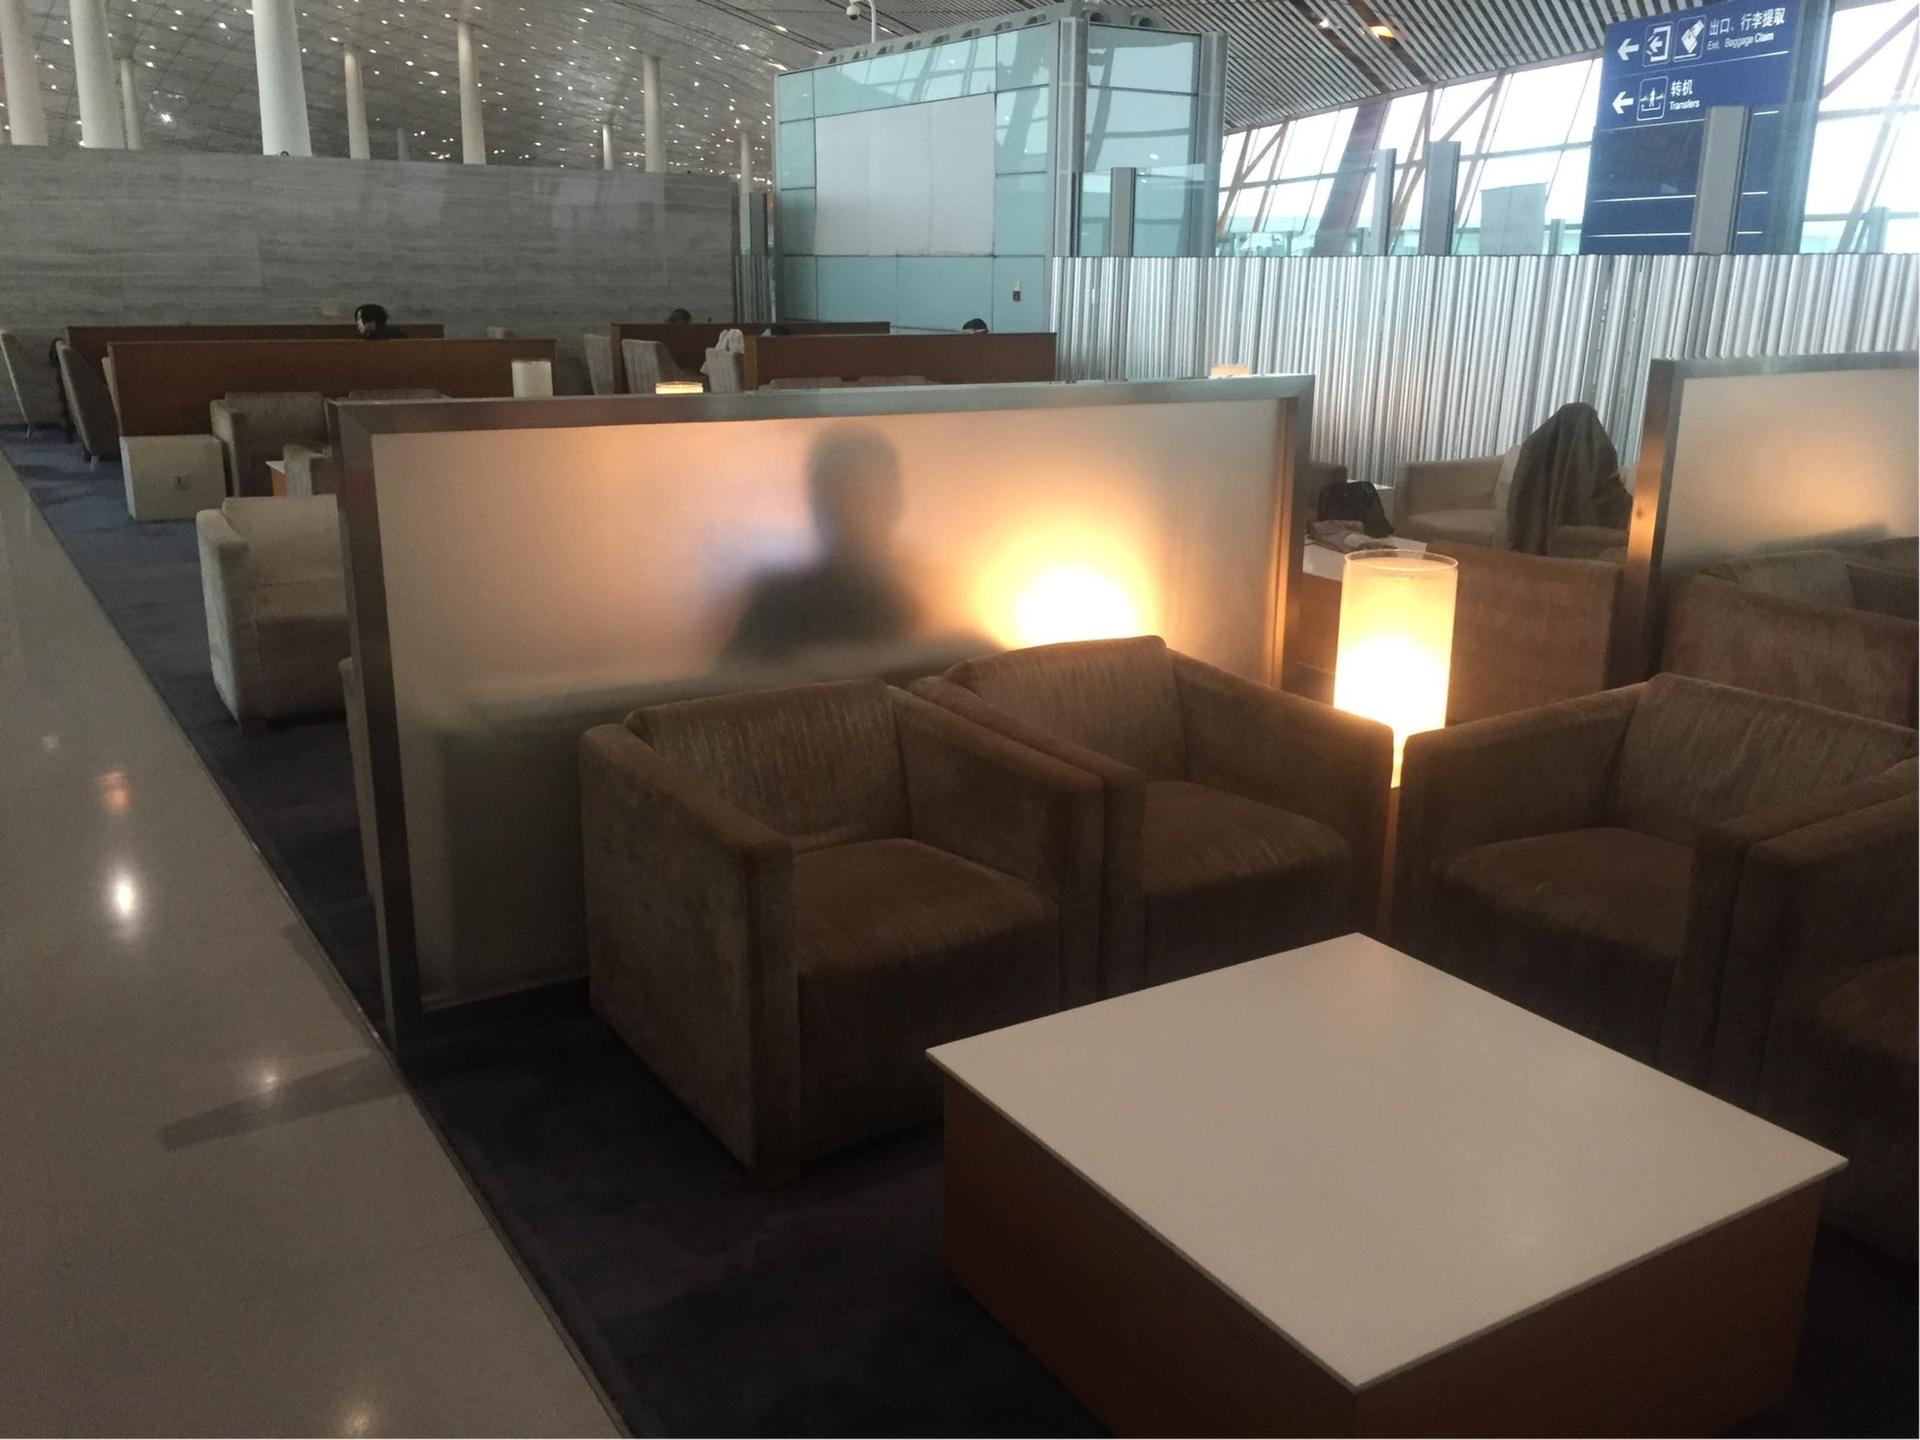 Cathay Pacific Lounge image 14 of 17